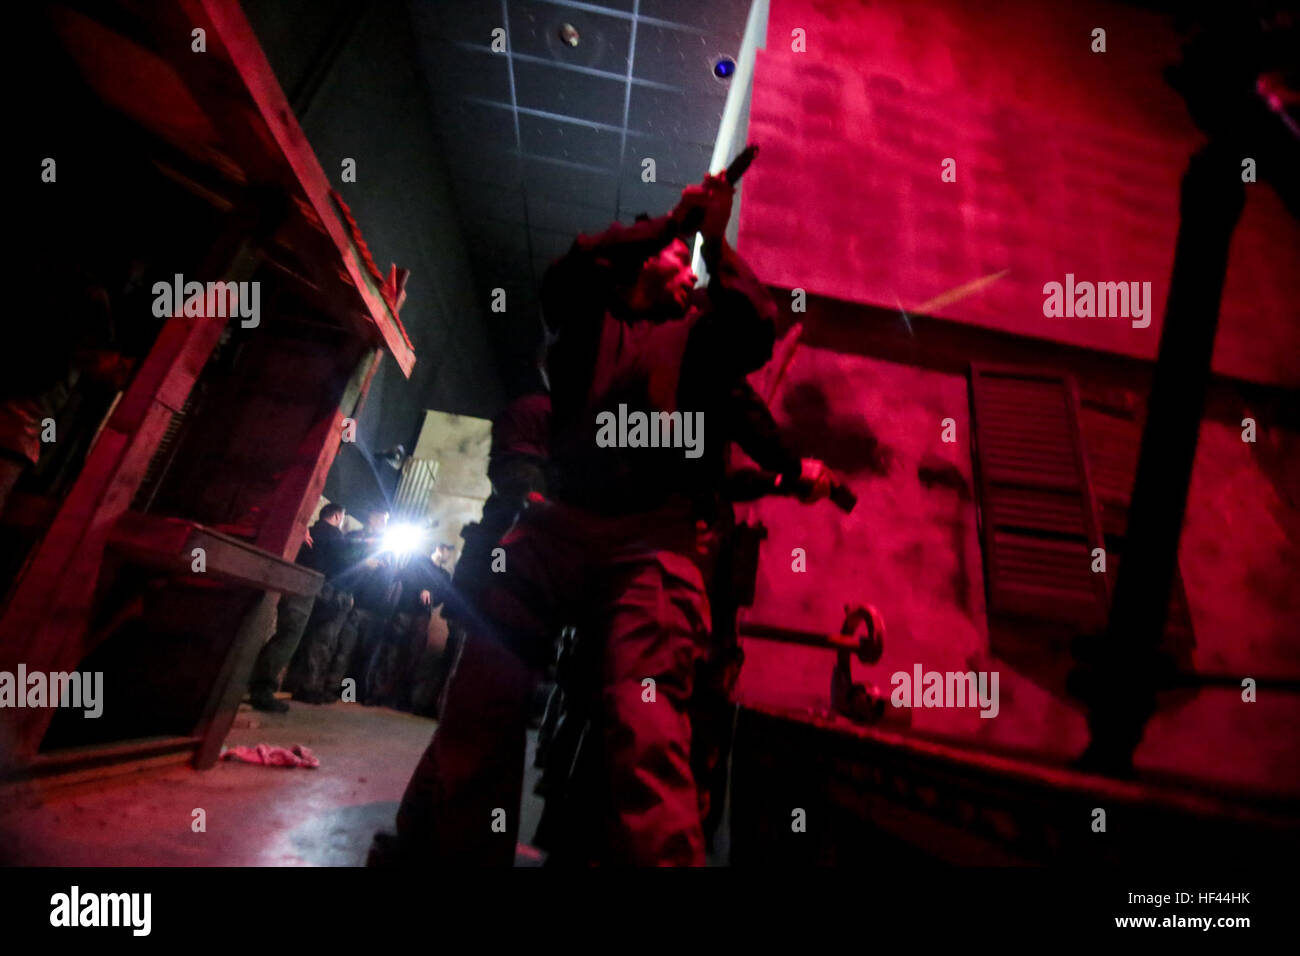 Police Officers assigned to the Atlantic City Special Weapons and Tactics (SWAT) team clear an indoor urban area during low light tactical training at the New Jersey National Guard's Joint Training and Training Development Center (JT2DC), Joint Base McGuire-Dix-Lakehurst, N.J., Oct. 14, 2016. The JT2DC is used by the military, civil authorities, and foreign allies for training and features the Virtual Interactive Combat Environment (VICE), indoor Military Operations in Urban Terrain (MOUT) Immersion/Night Fighting Lanes, Call For Fire Trainer (CFFT) and Immersion Lane, Engagement Skills Traine Stock Photo